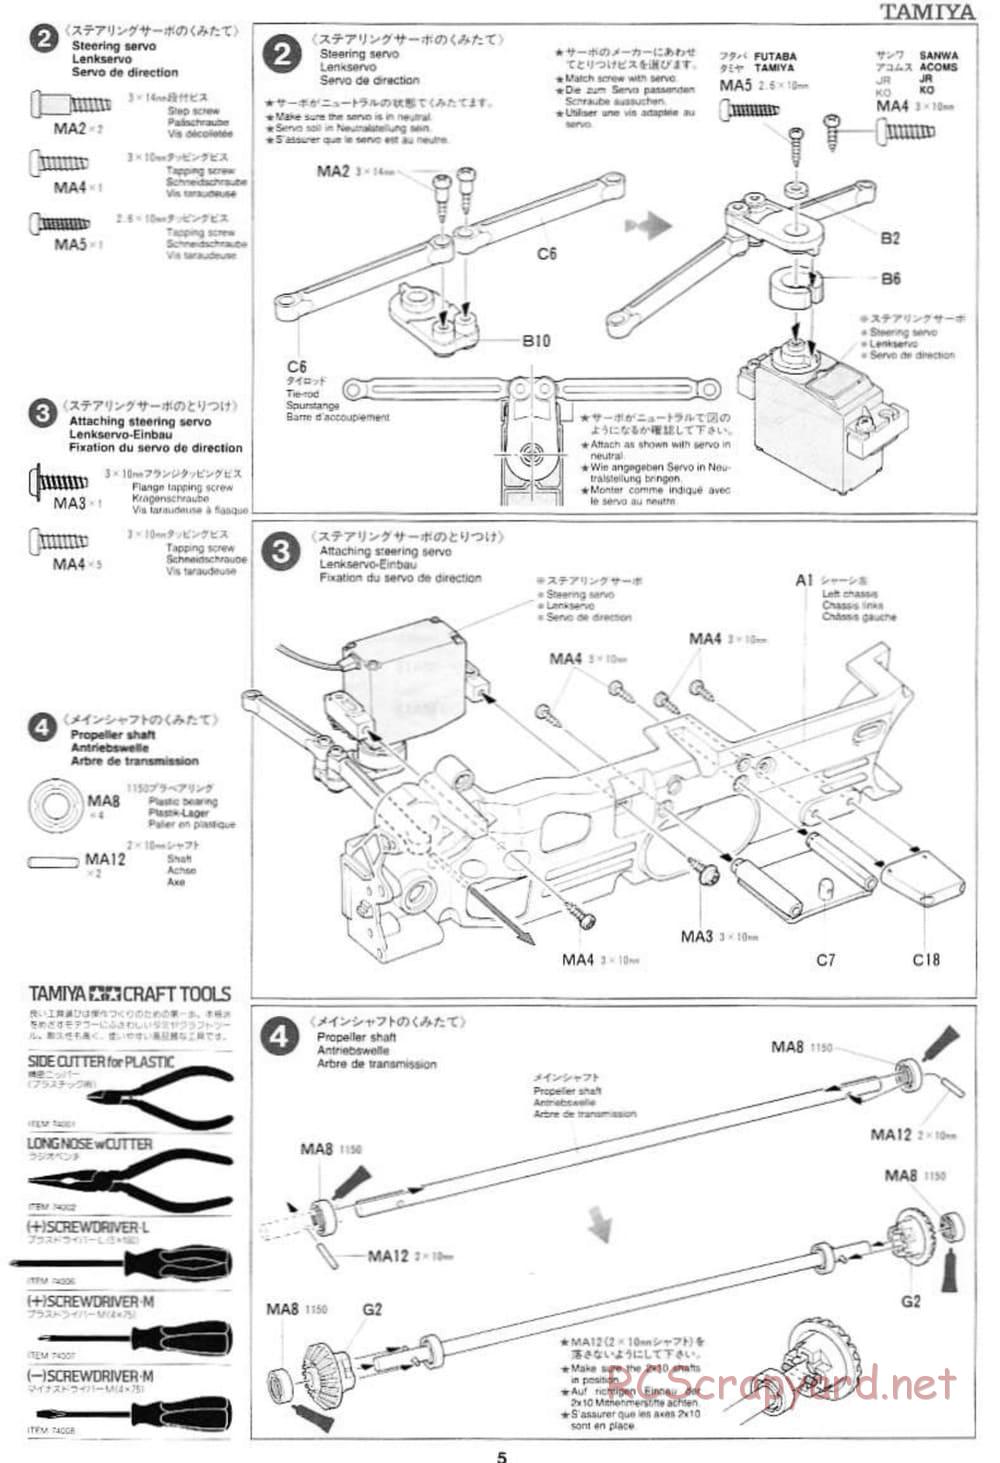 Tamiya - Pennzoil Nismo GT-R - TL-01 Chassis - Manual - Page 5